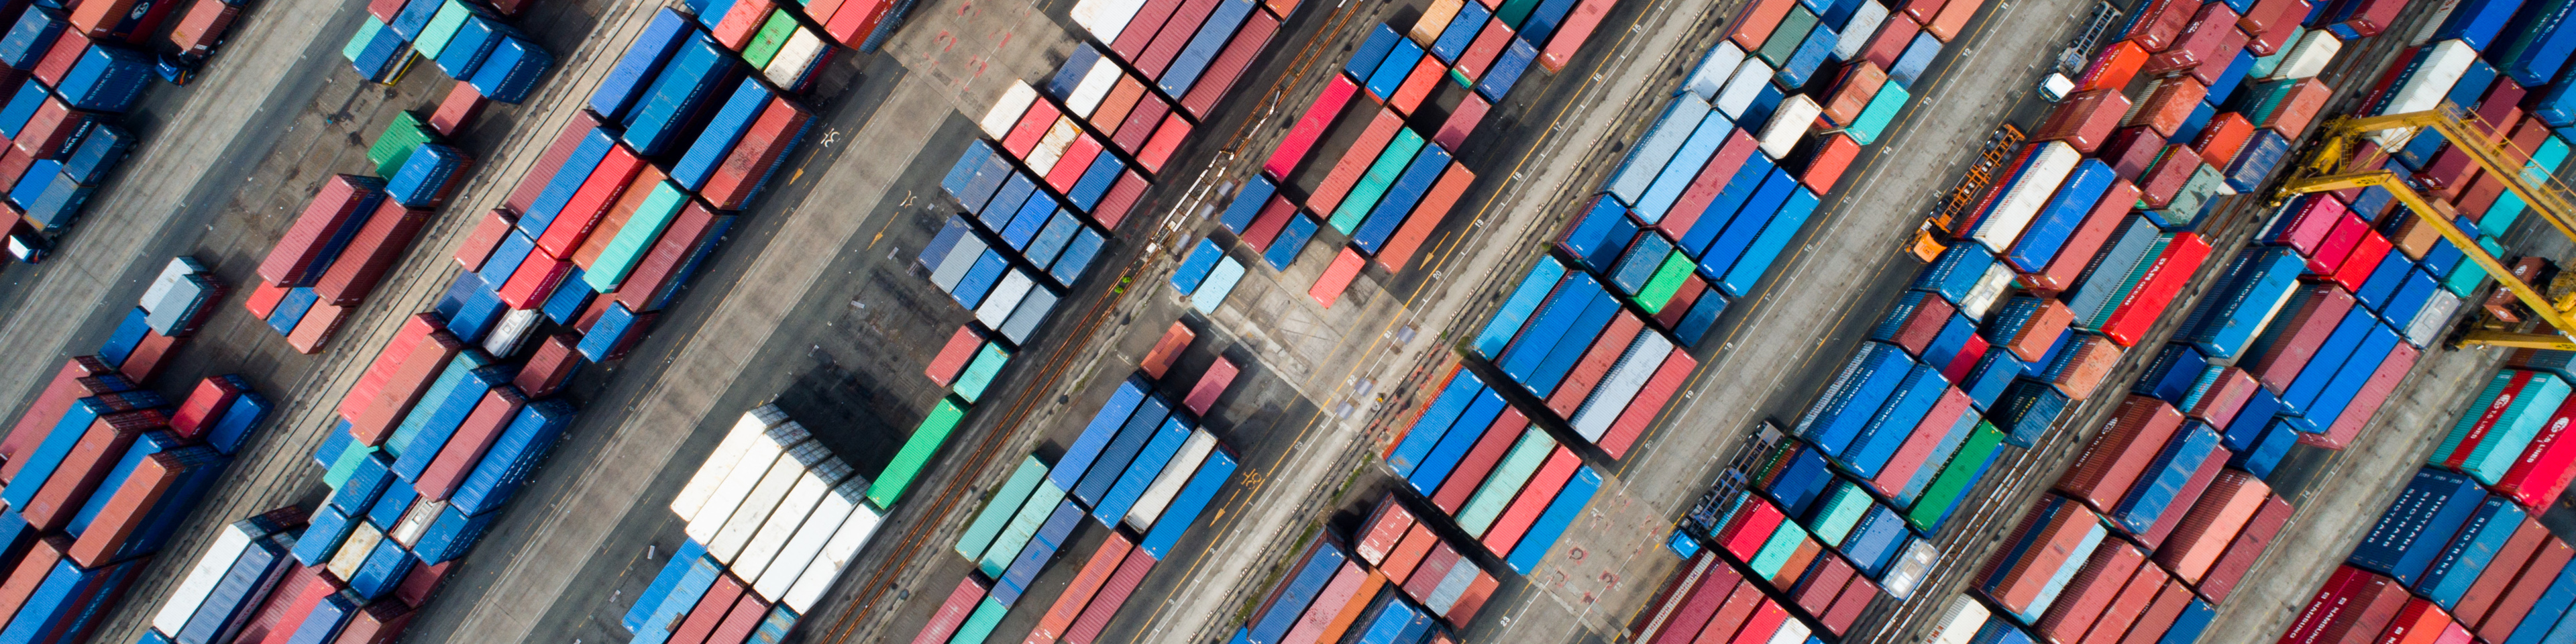 Shipping containers sit stacked in this aerial photograph taken above a port in South Korea. Photographer: SeongJoon Cho/Bloomberg